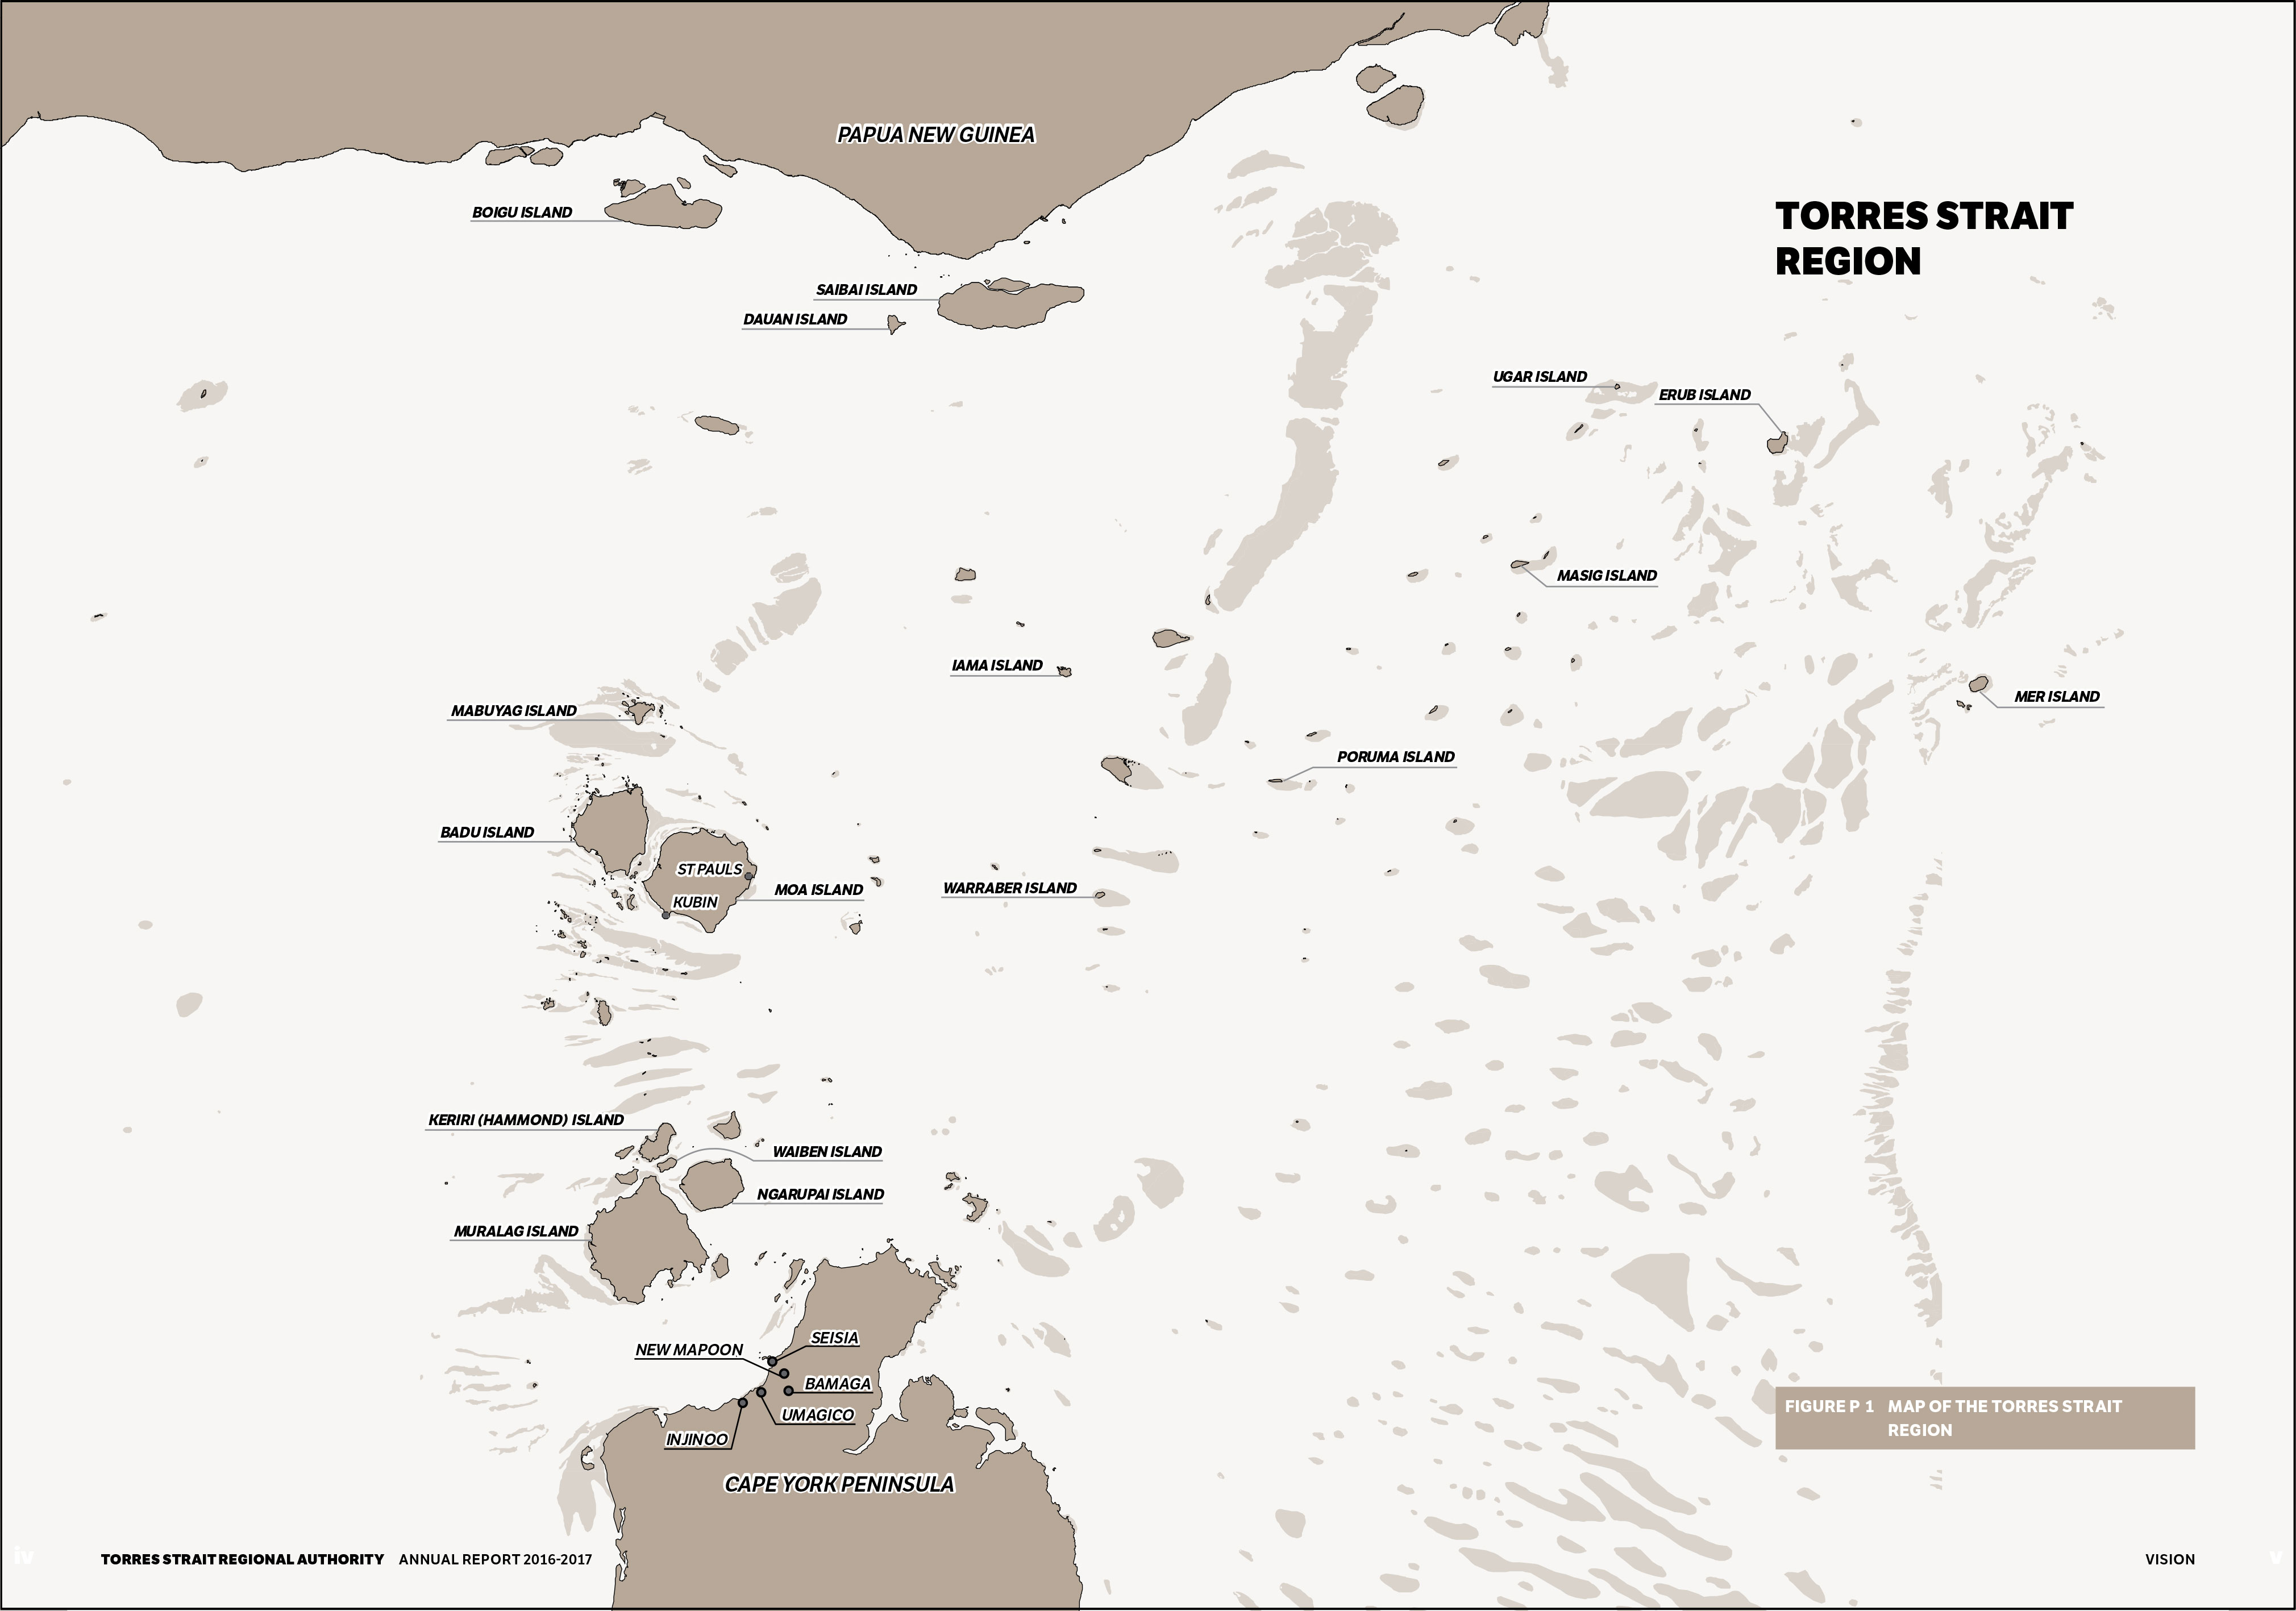 a map of the Torres Strait Region